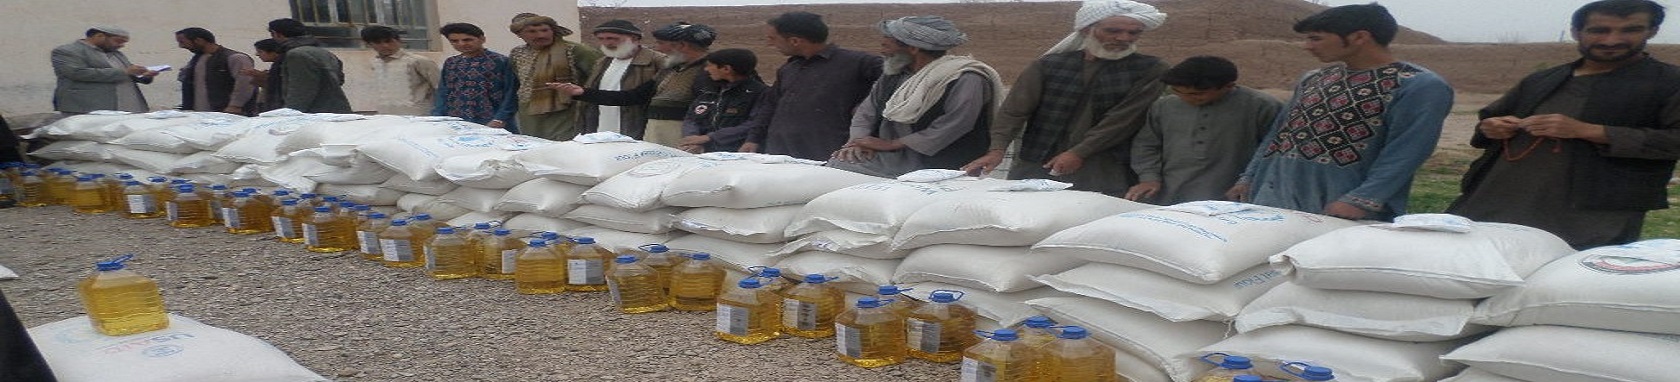 Food distribution for 63 conflicted affected IDPs